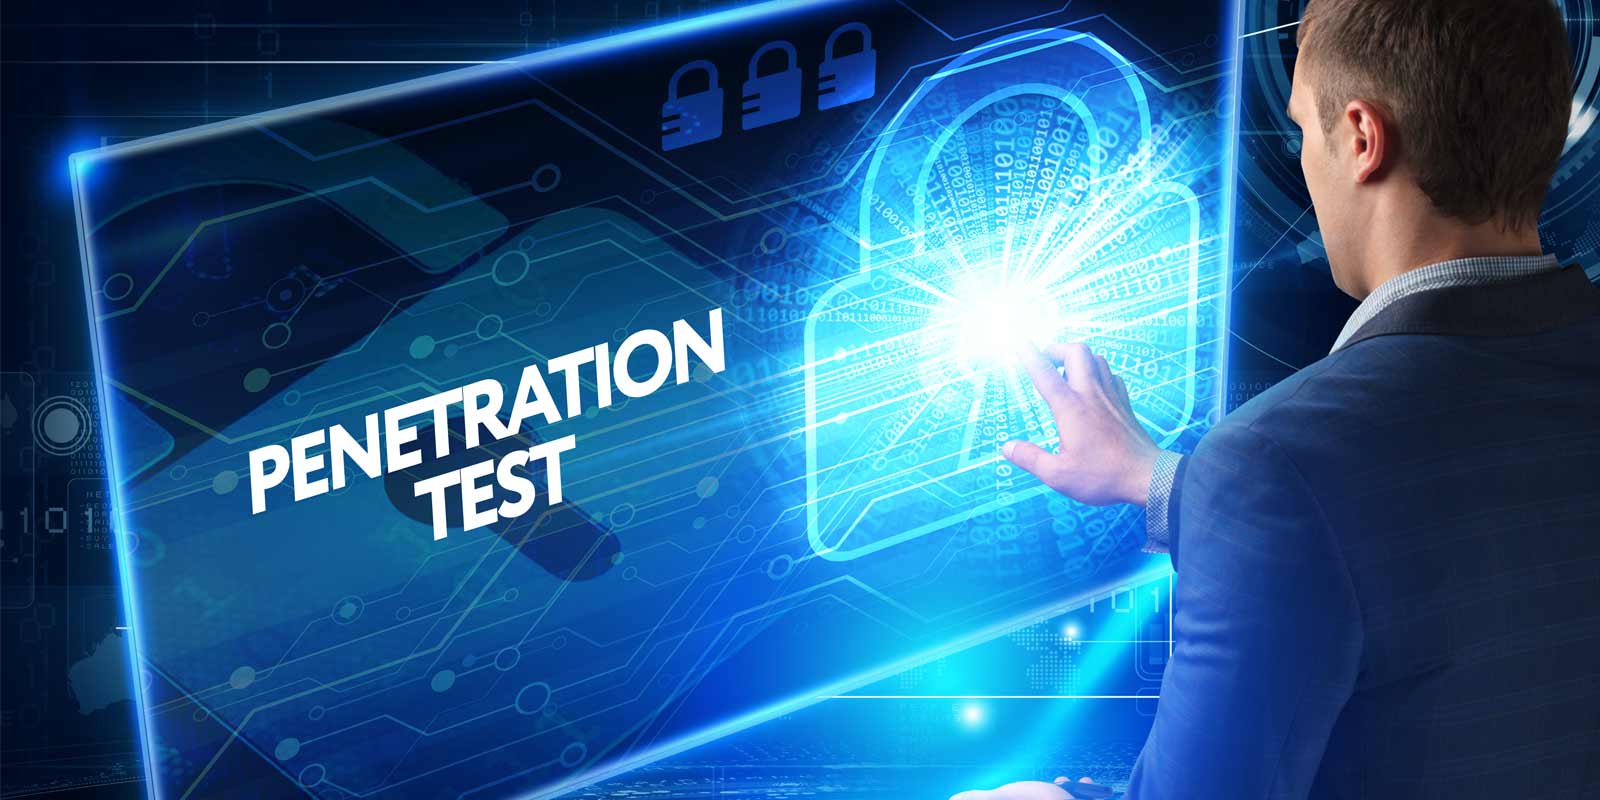 Penetration Testing Market Is Estimated To Witness High Growth Owing To The Increasing Number Of Cyber Threats And The Need For Stringent Security Measures In Various Organizations